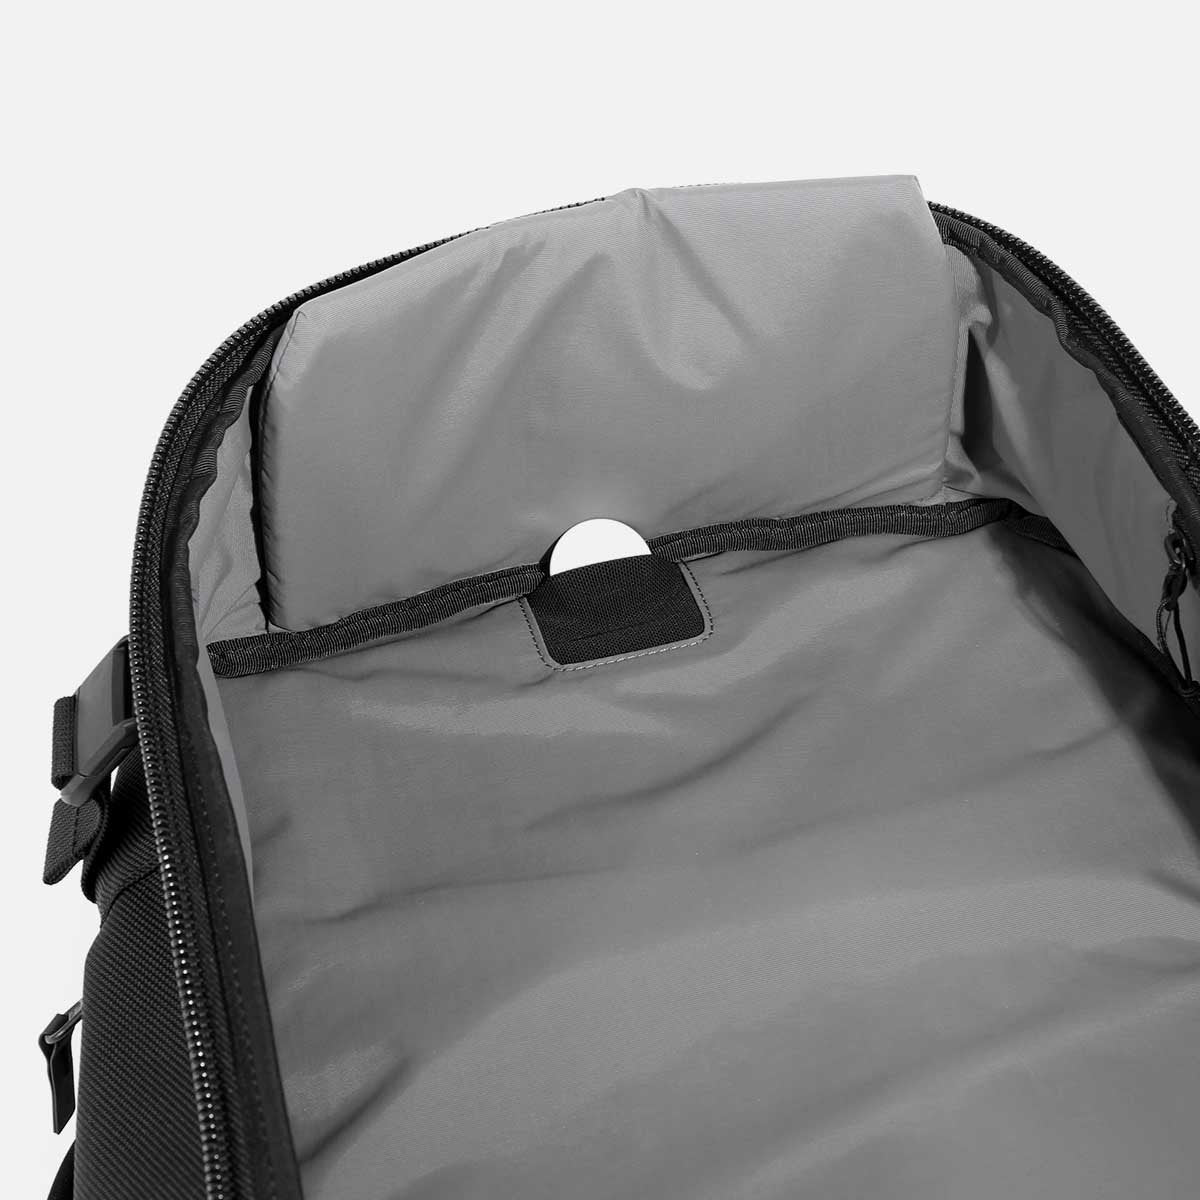 Best laptop backpack for work and travel mens